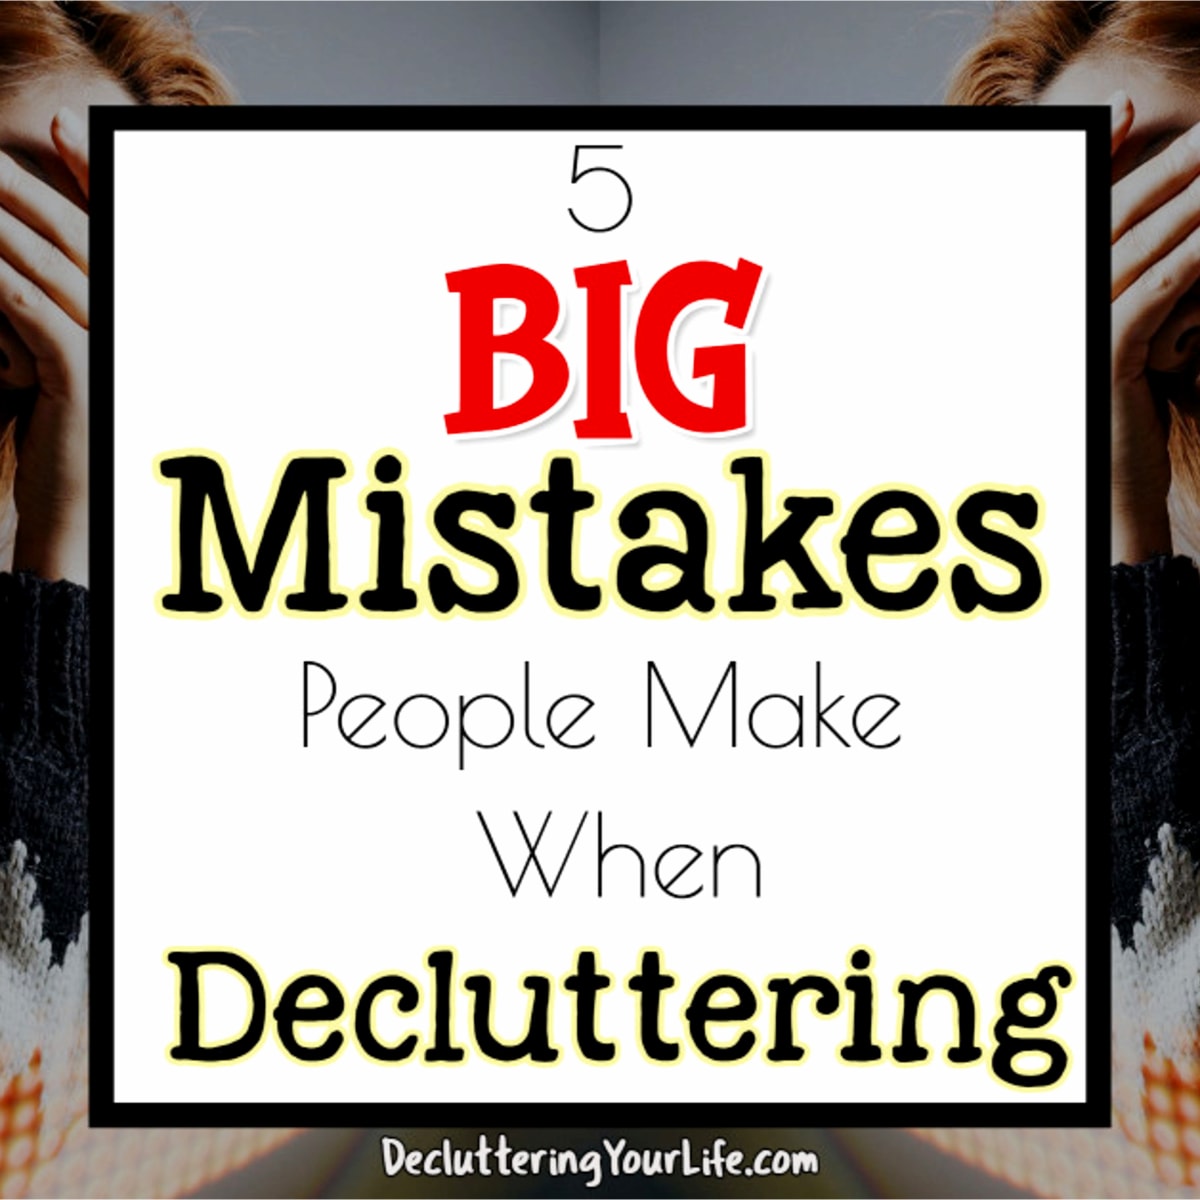 Decluttering Tips-5 Mistakes People Make When Decluttering a Home. Trying to declutter your home but feeling overwhelmed? Don't make these decluttering mistakes!